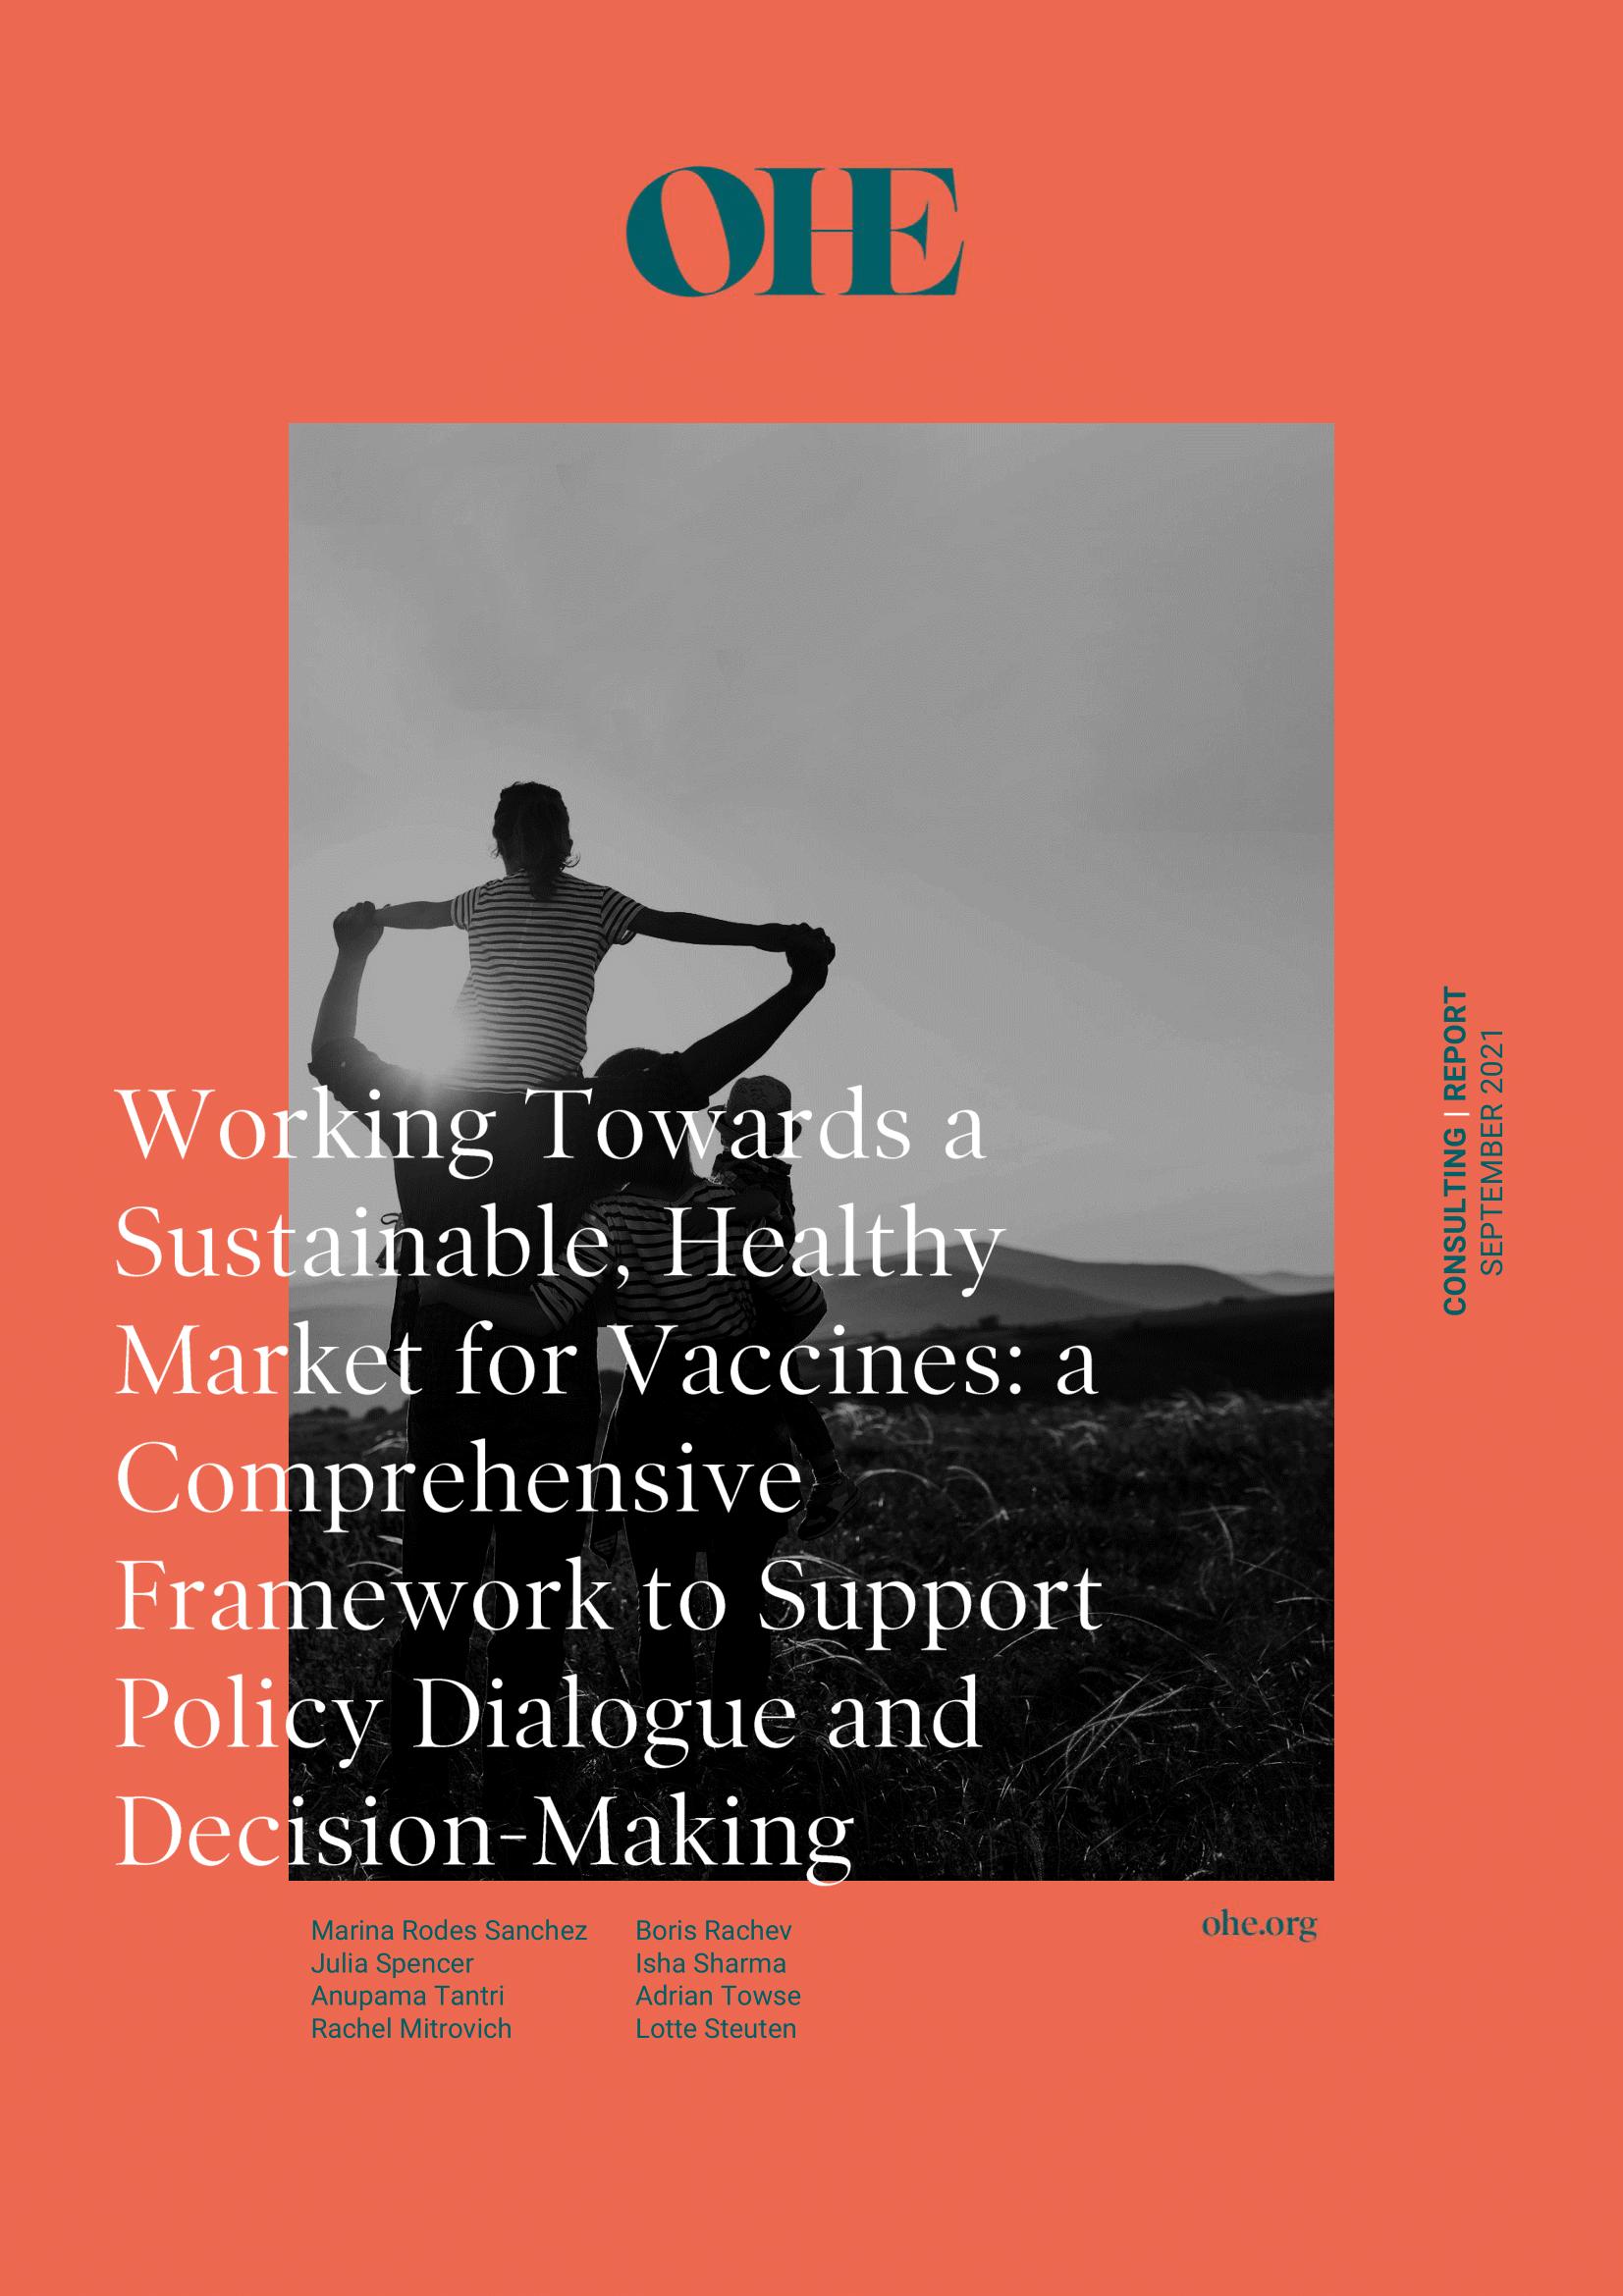 Working Towards a Sustainable, Healthy Market for Vaccines: a Comprehensive Framework to Support Policy Dialogue and Decision-Making